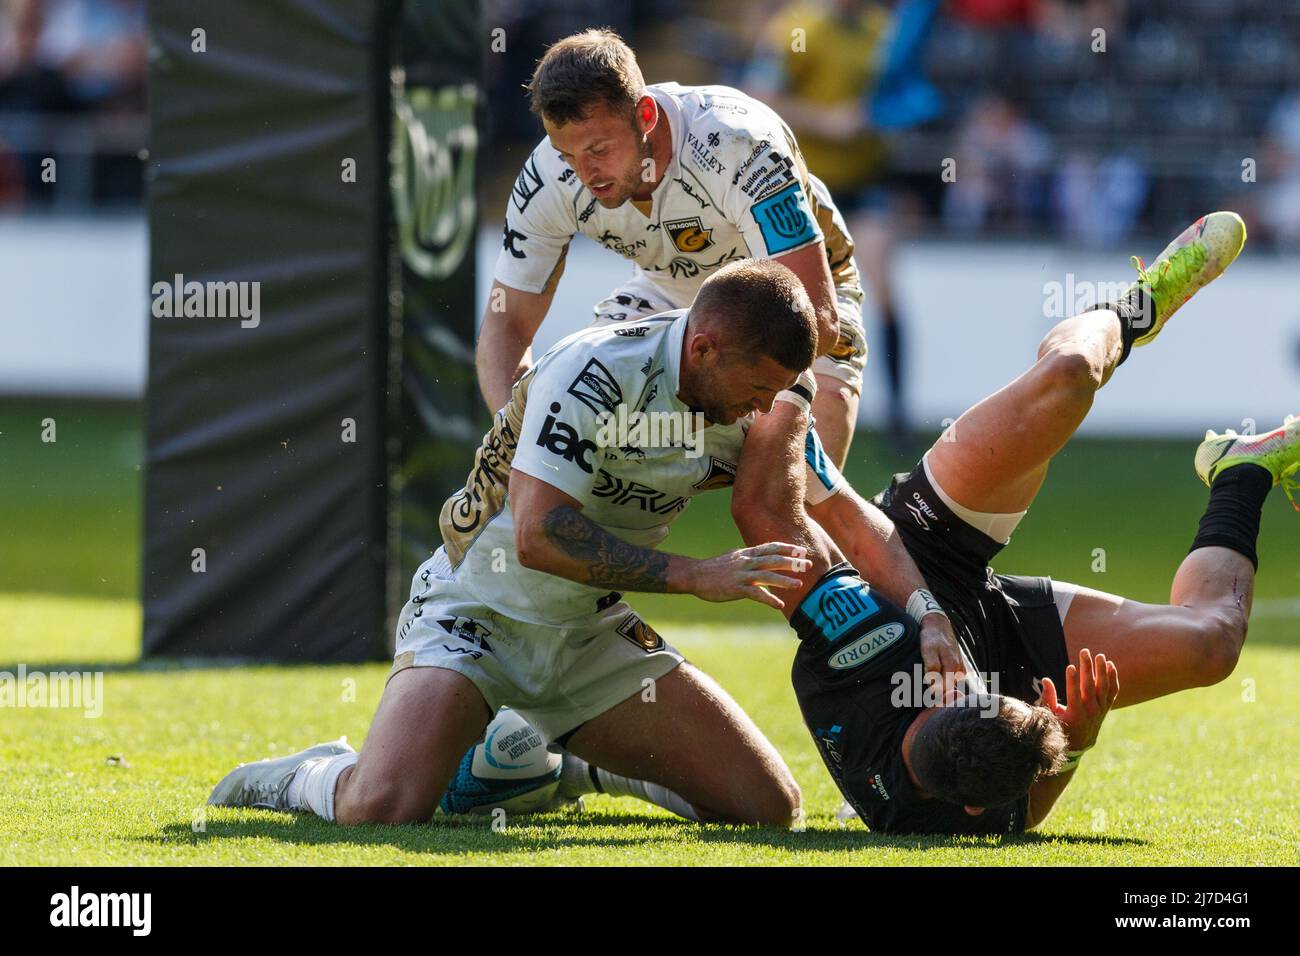 Swansea, UK. 8 May, 2022. A fight breaks out between Lewis Jones of Dragons and Luke Morgan of Ospreys during the Ospreys v Dragons United Rugby Championship Match. Credit: Gruffydd ThomasAlamy Stock Photo